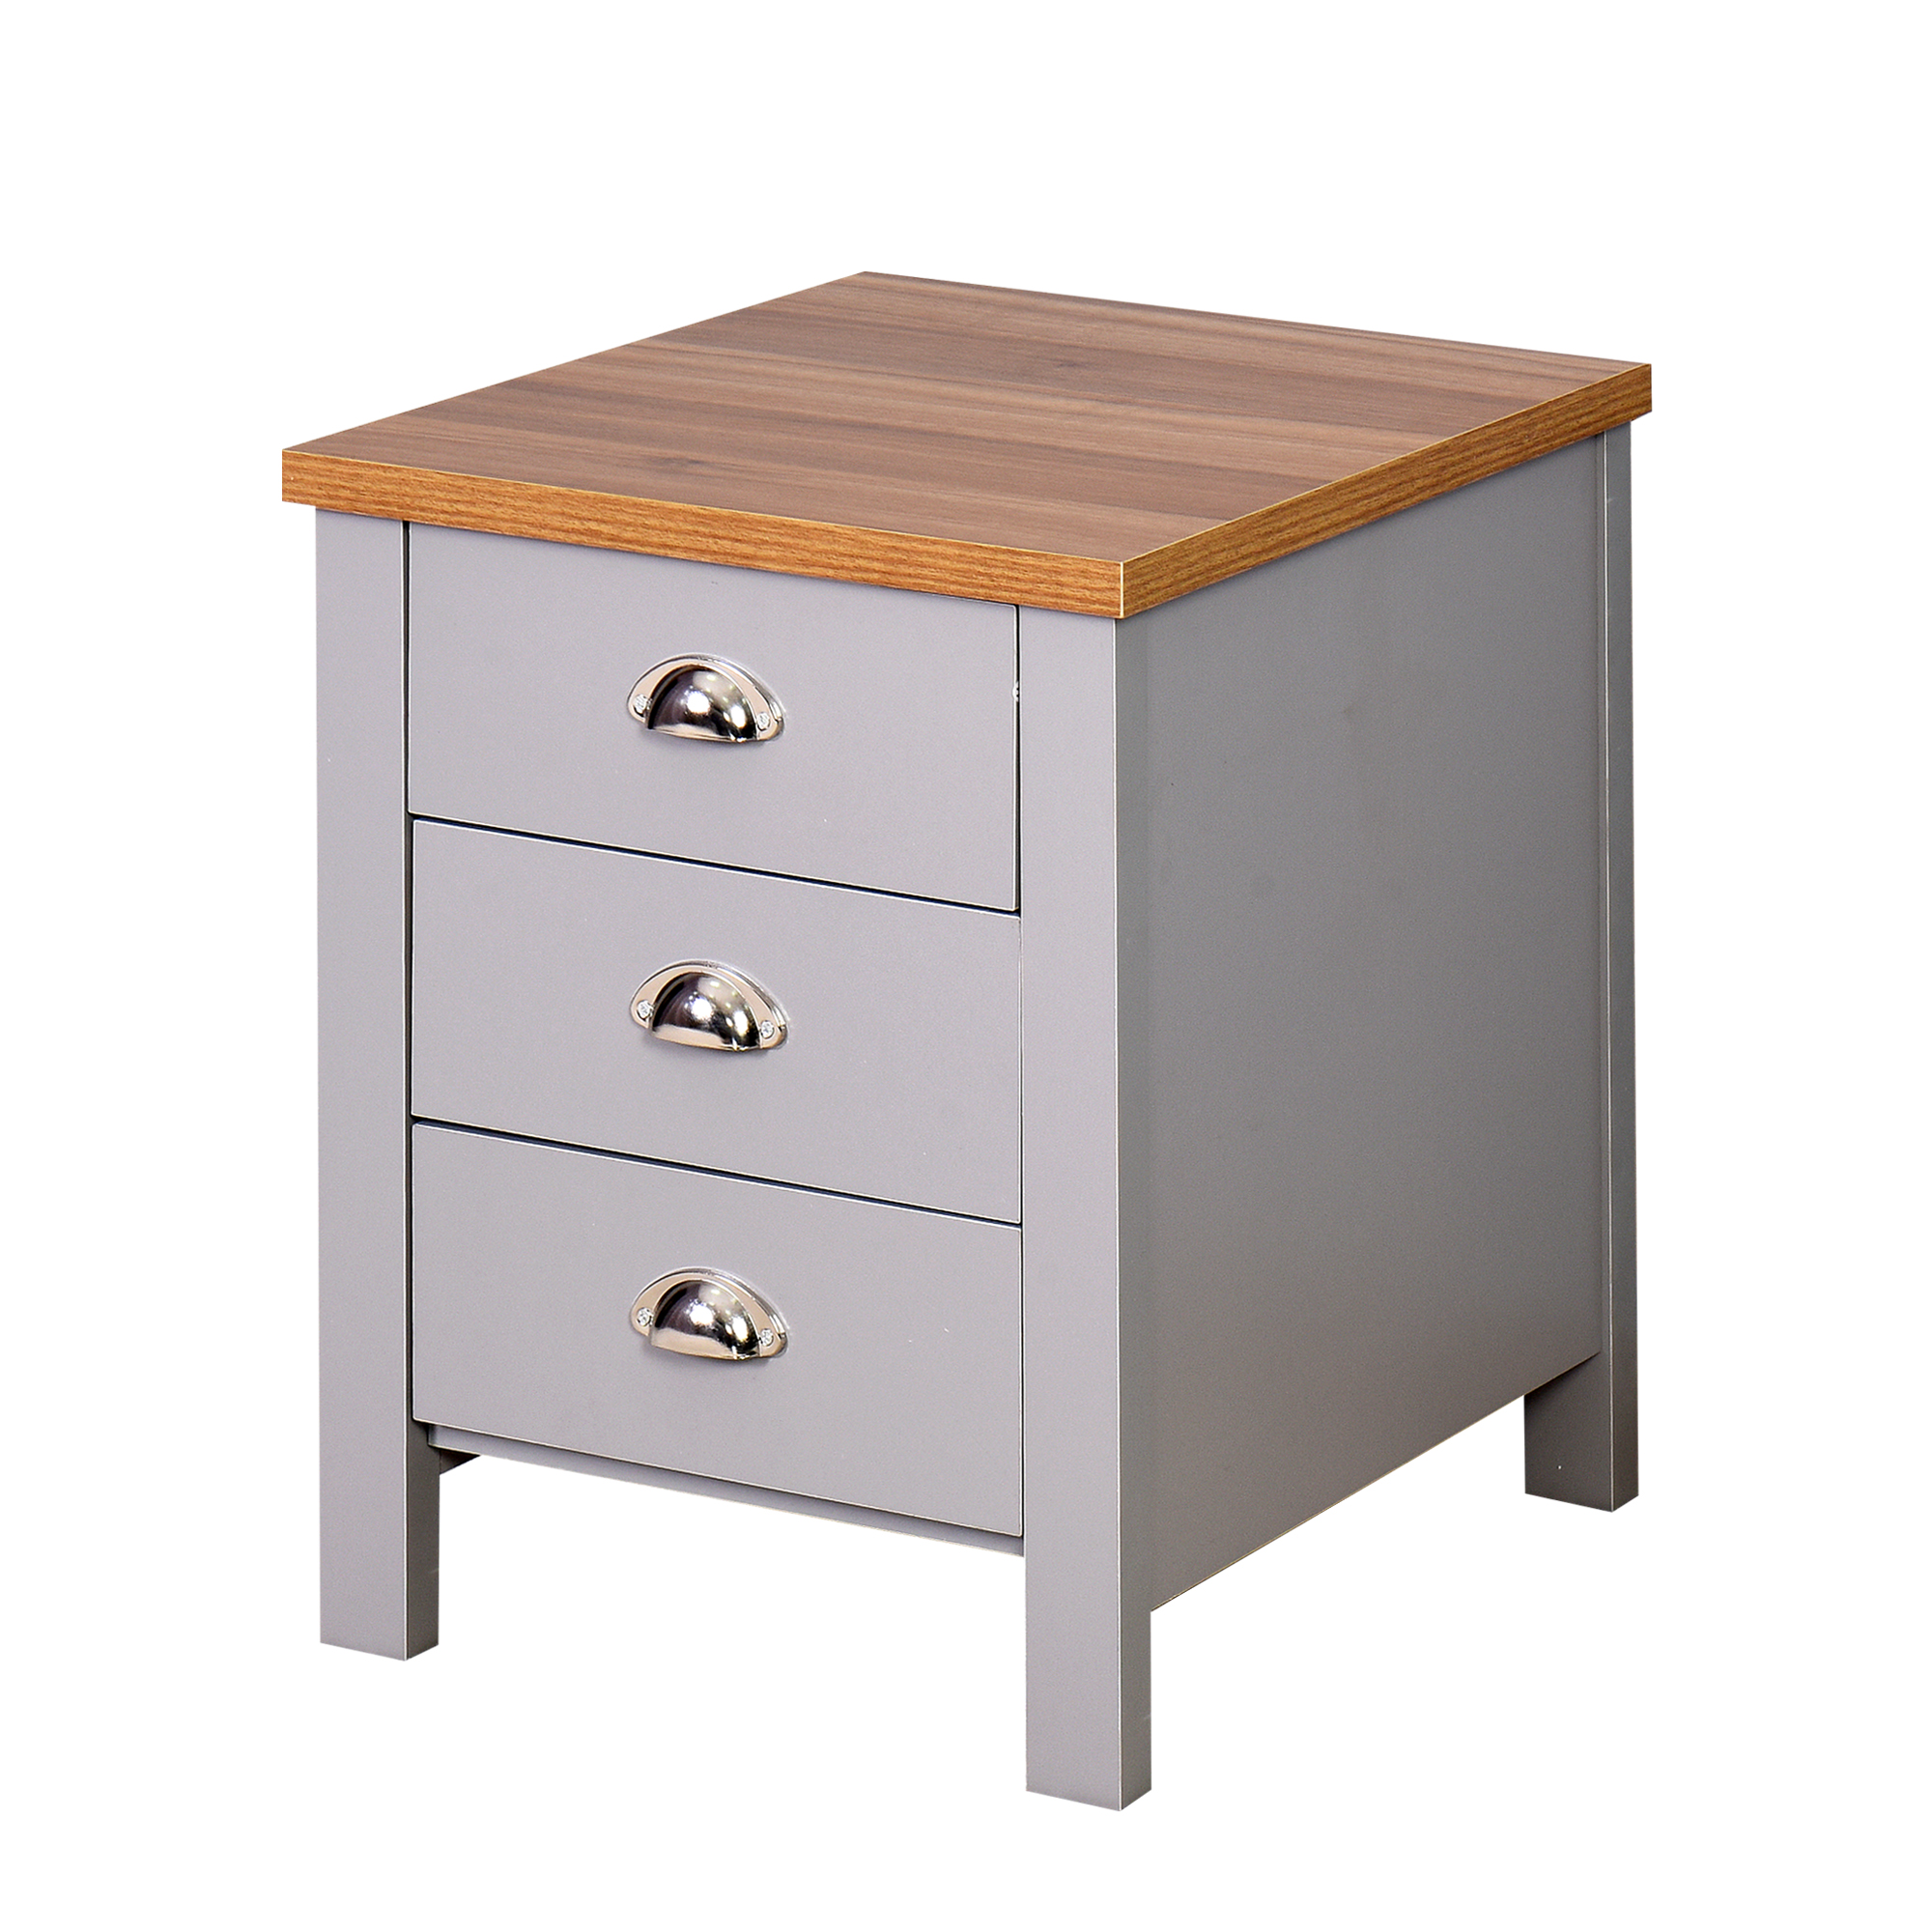 Living Room Storage Cabinet Bedroom nightstand with 3 Drawers 17.7 x 17.7 x 22.05 inch-Boyel Living